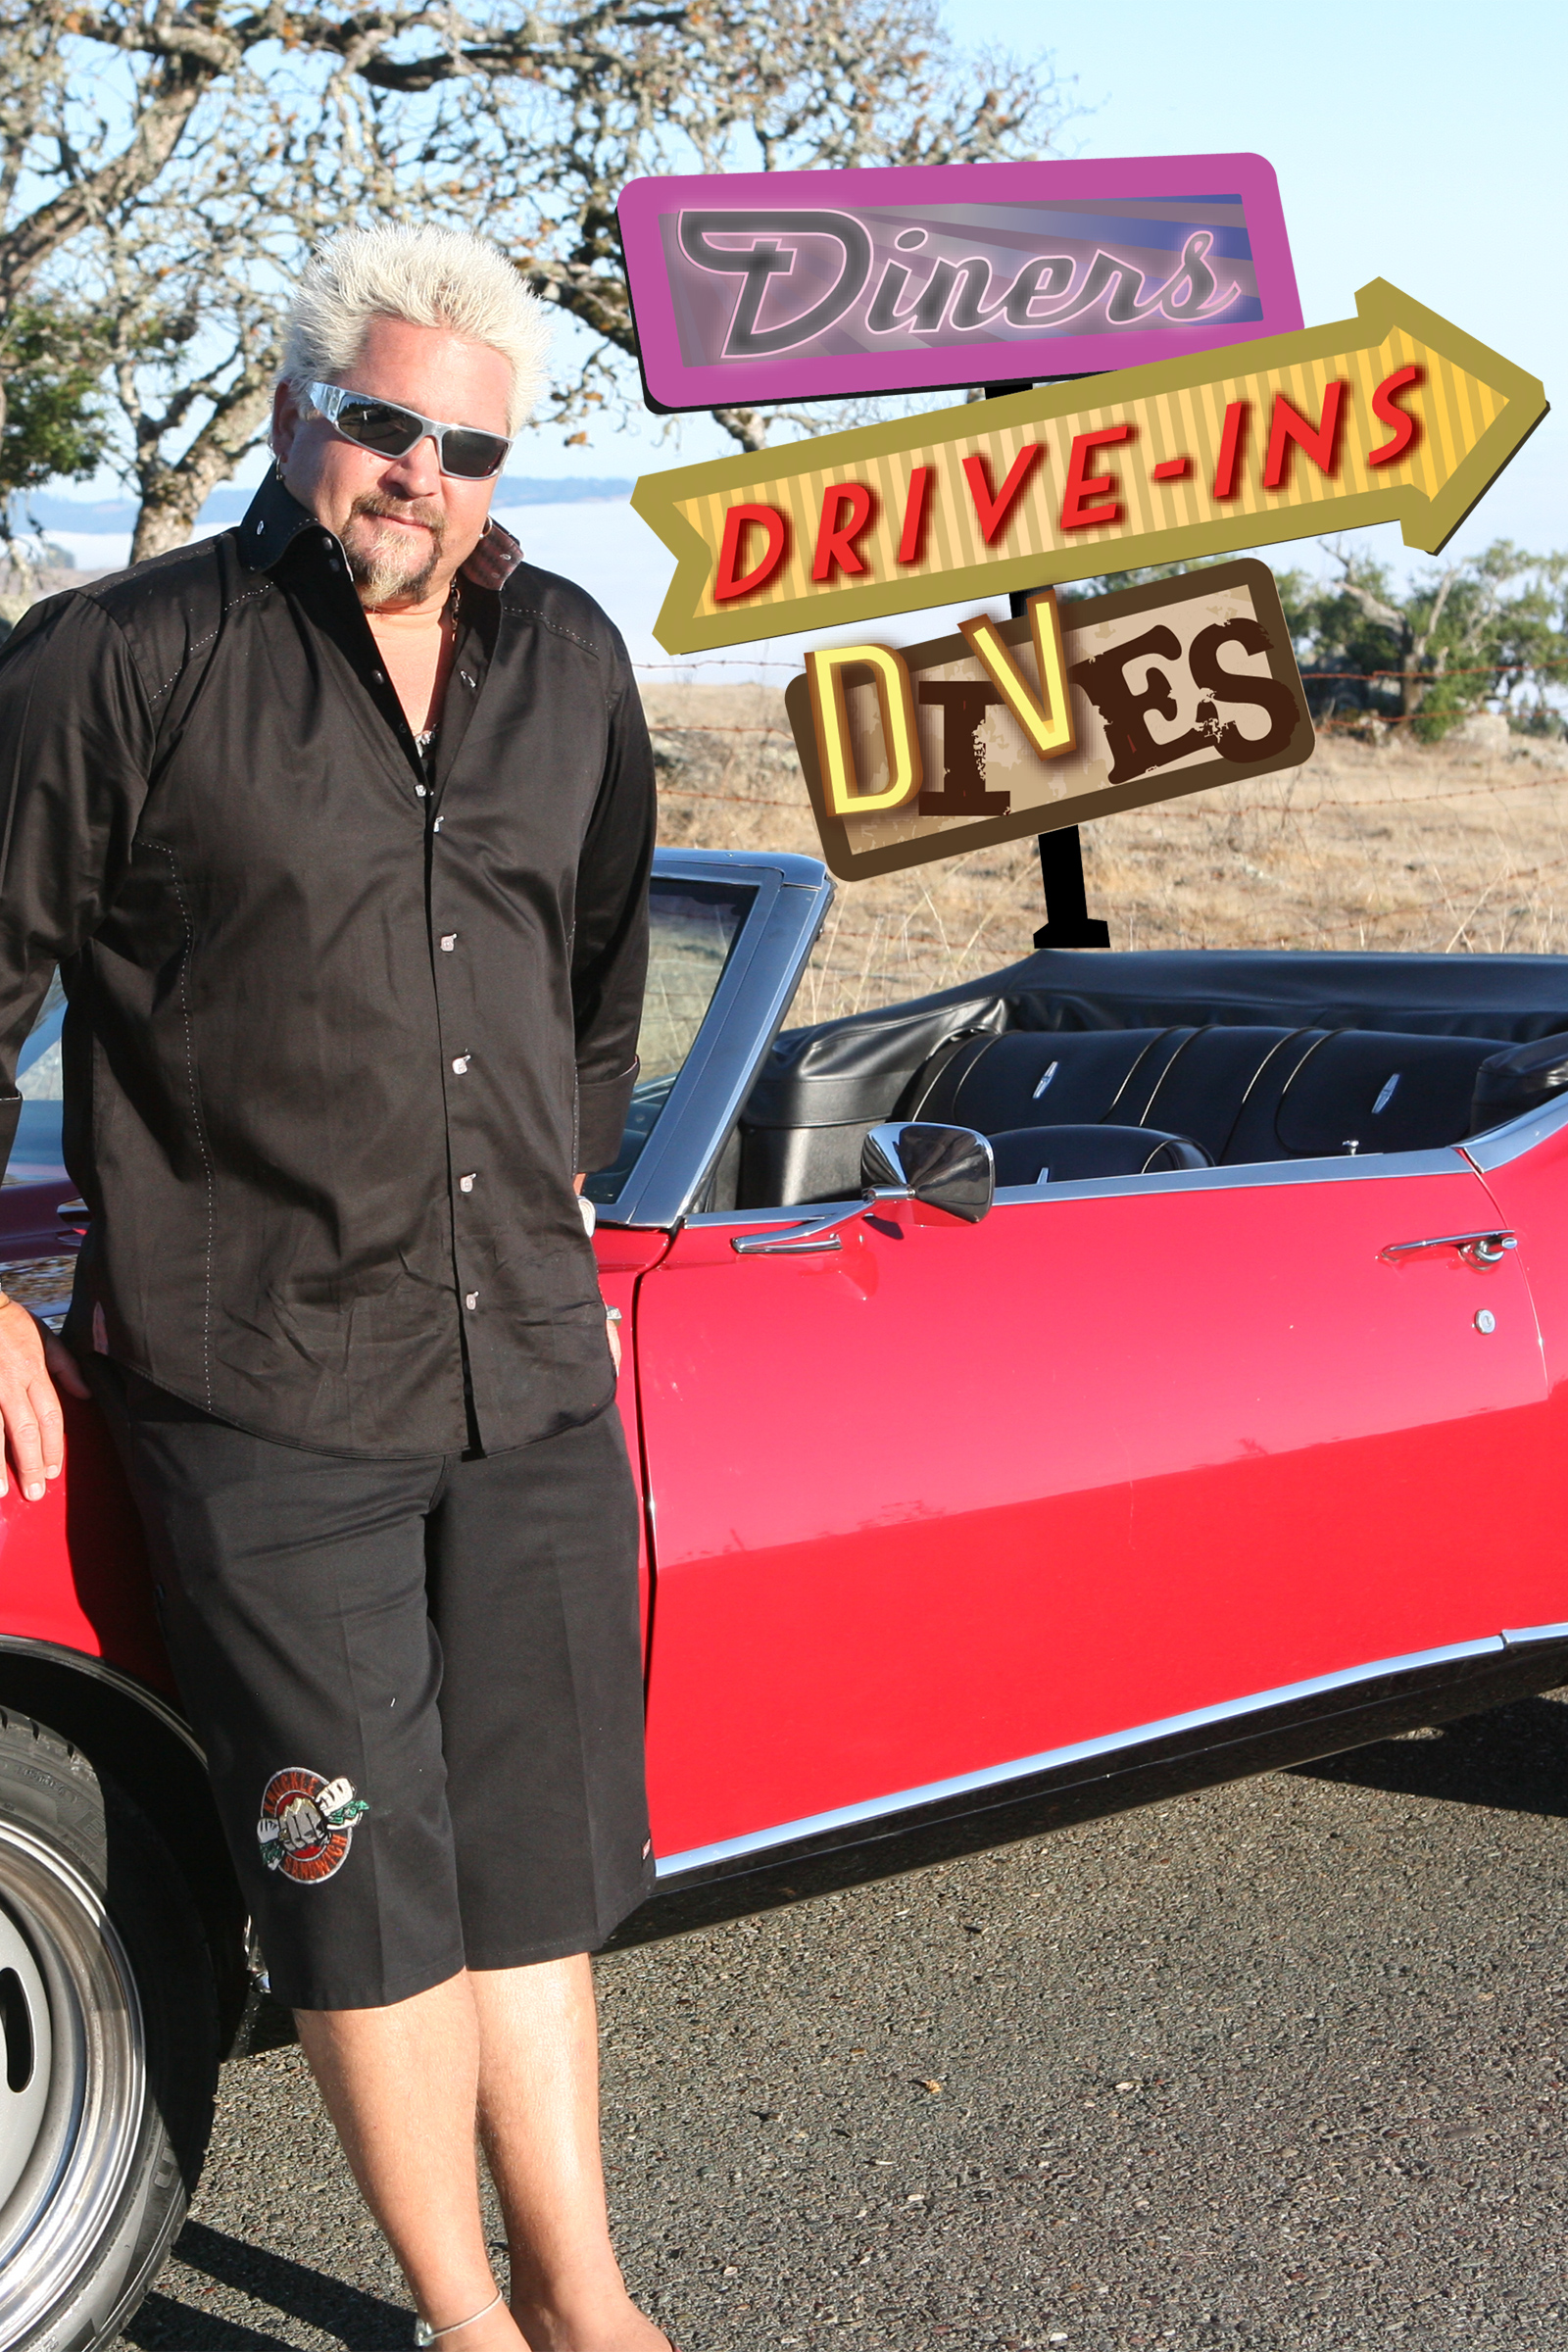 Diners, Drive-Ins and Dives.